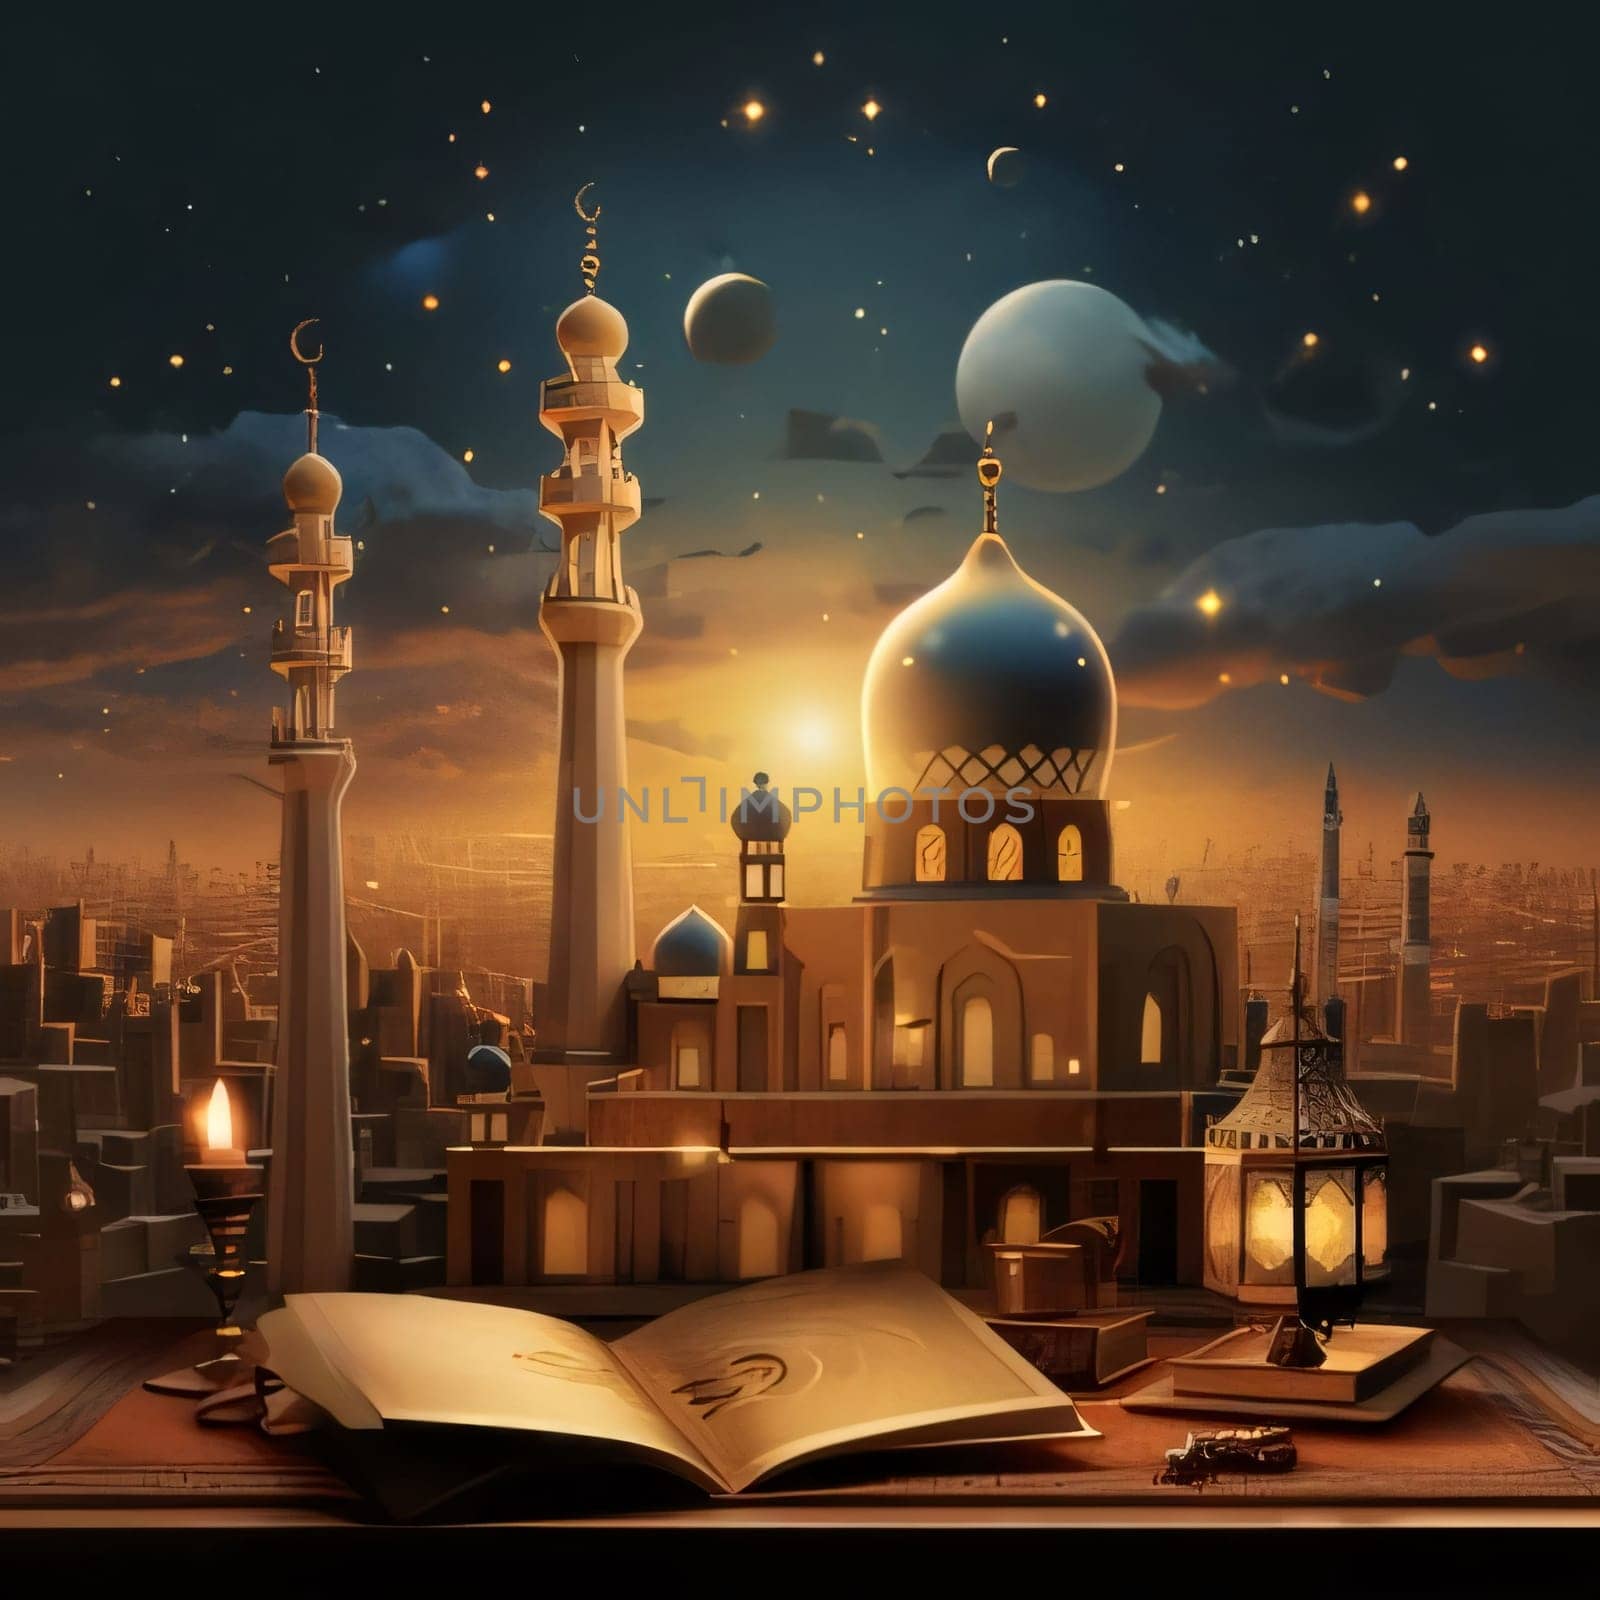 Illustration of an open book lantern and a view of a mosque with minarets at night. Mosque as a place of prayer for Muslims. A time to meet with Allah.